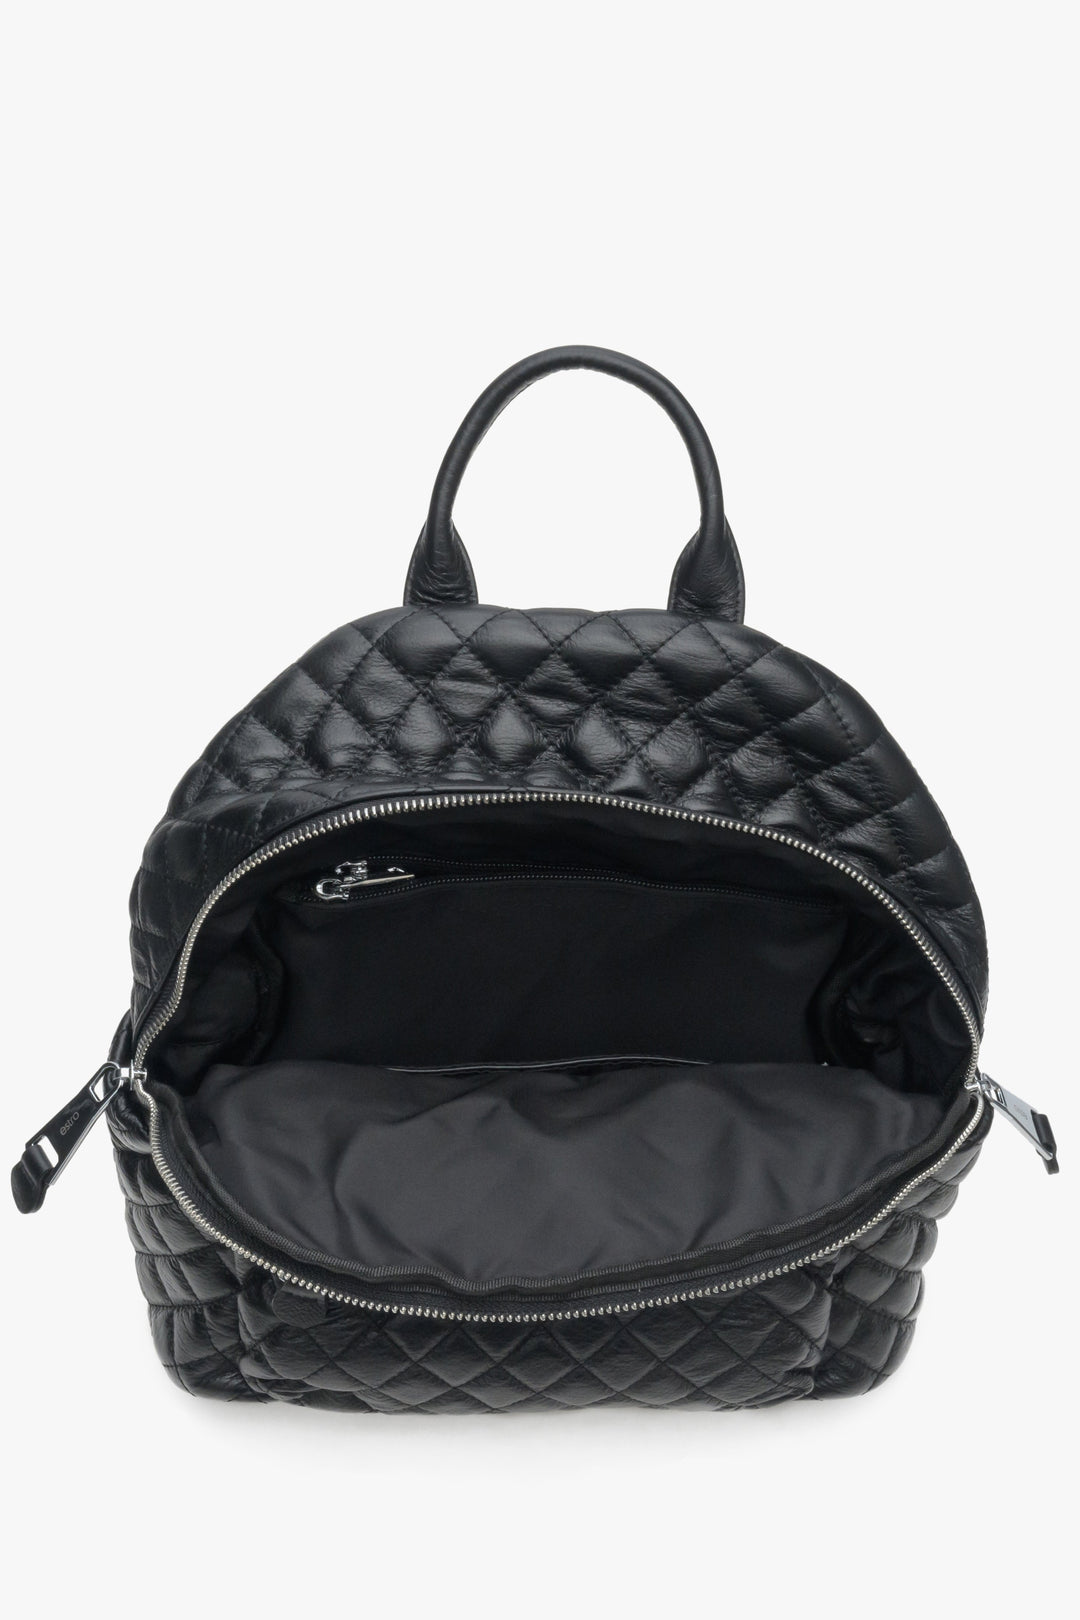 Urban, leather women's backpack in black colour - close-up of the interior of the model.